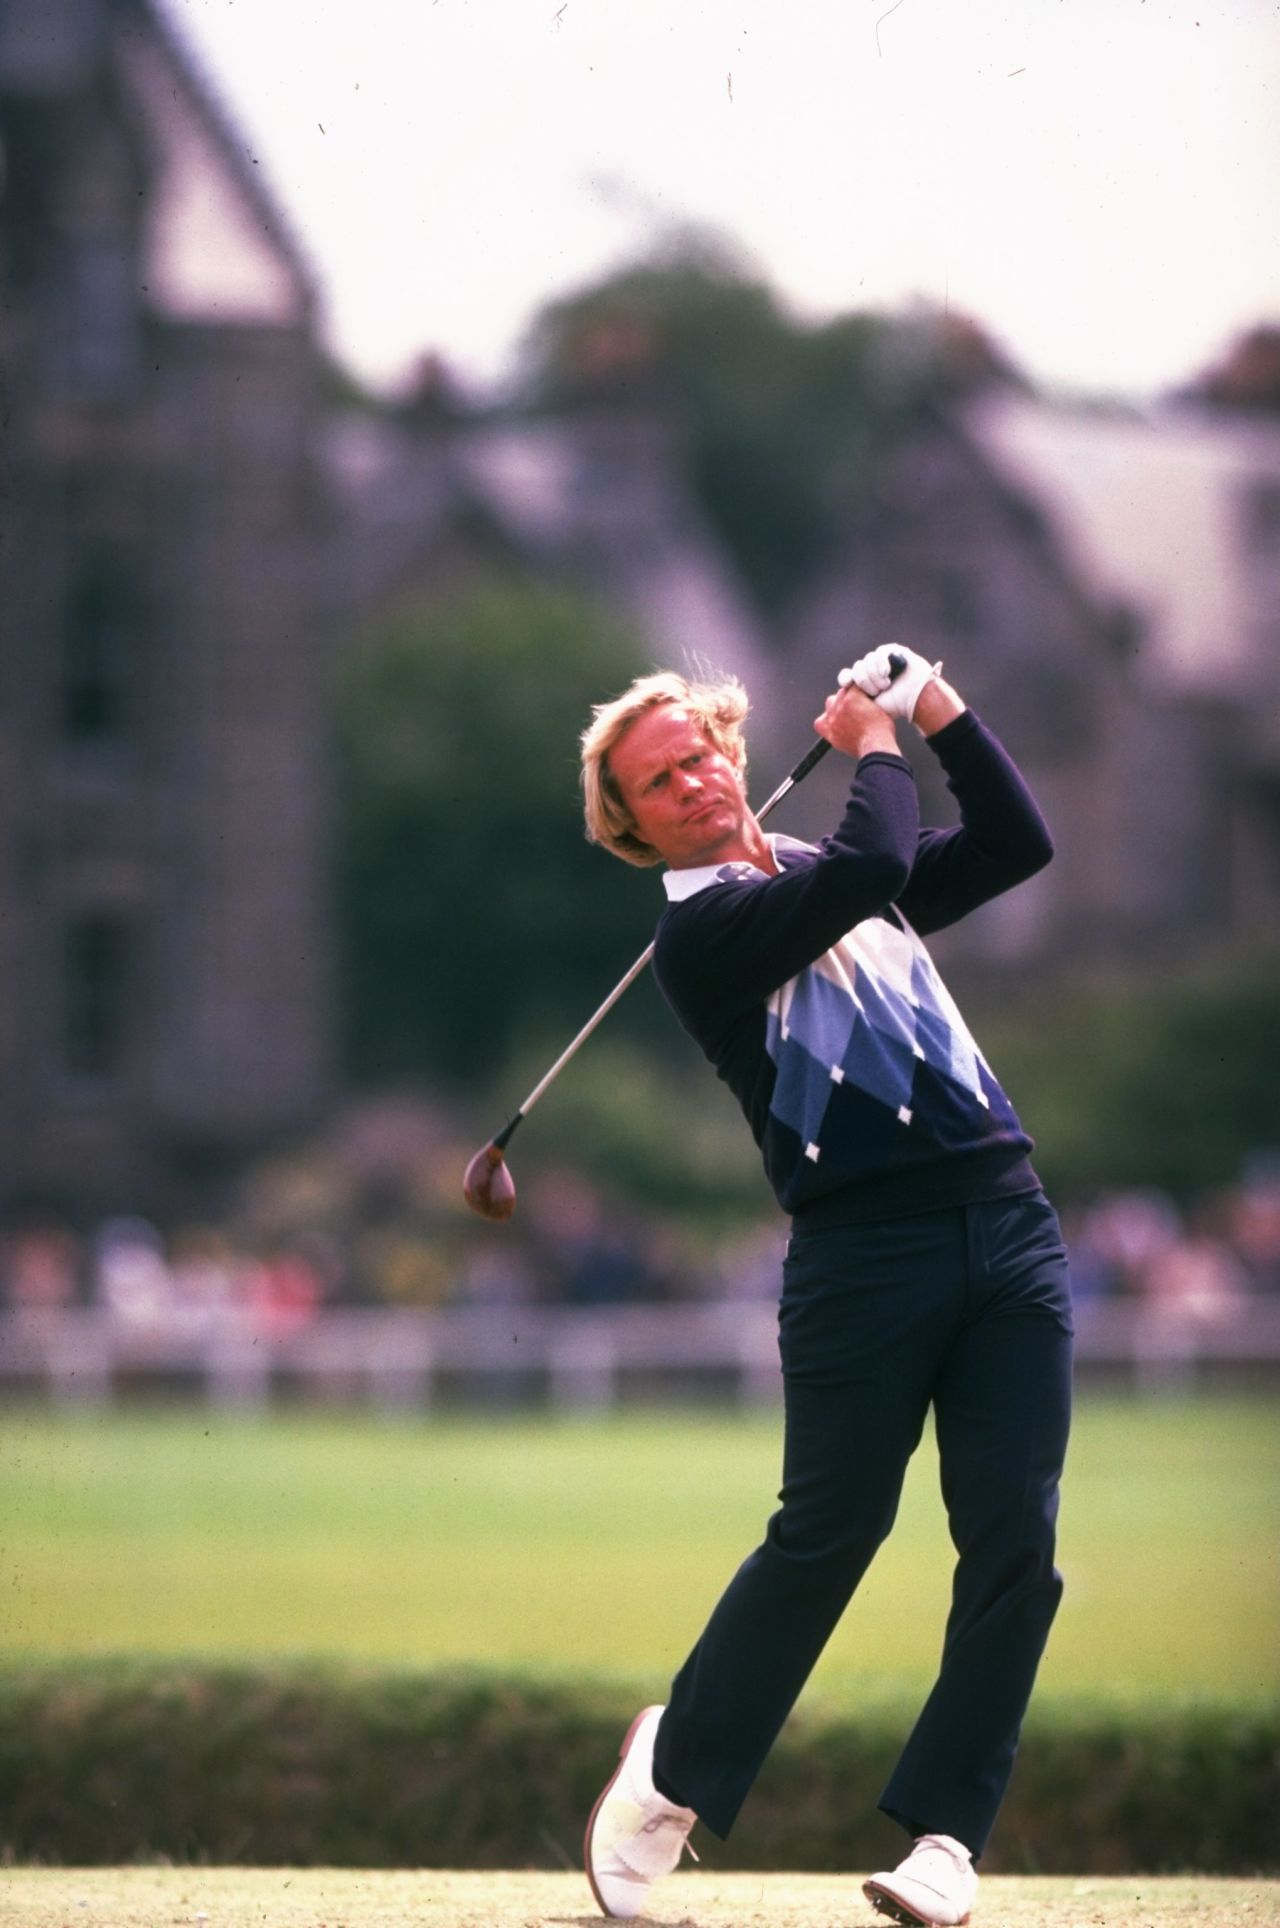 Palmer's exploits in the UK inspired a young Jack Nicklaus to compete at the Open Championship. The 18-time major champion is pictured here at St. Andrews' Old Course in 1978, when he would win his third and final Claret Jug. Both Nicklaus, dubbed the "Golden Bear," and Arnold "The King" Palmer would exploit their on-course success with profitable clothing businesses off it.  